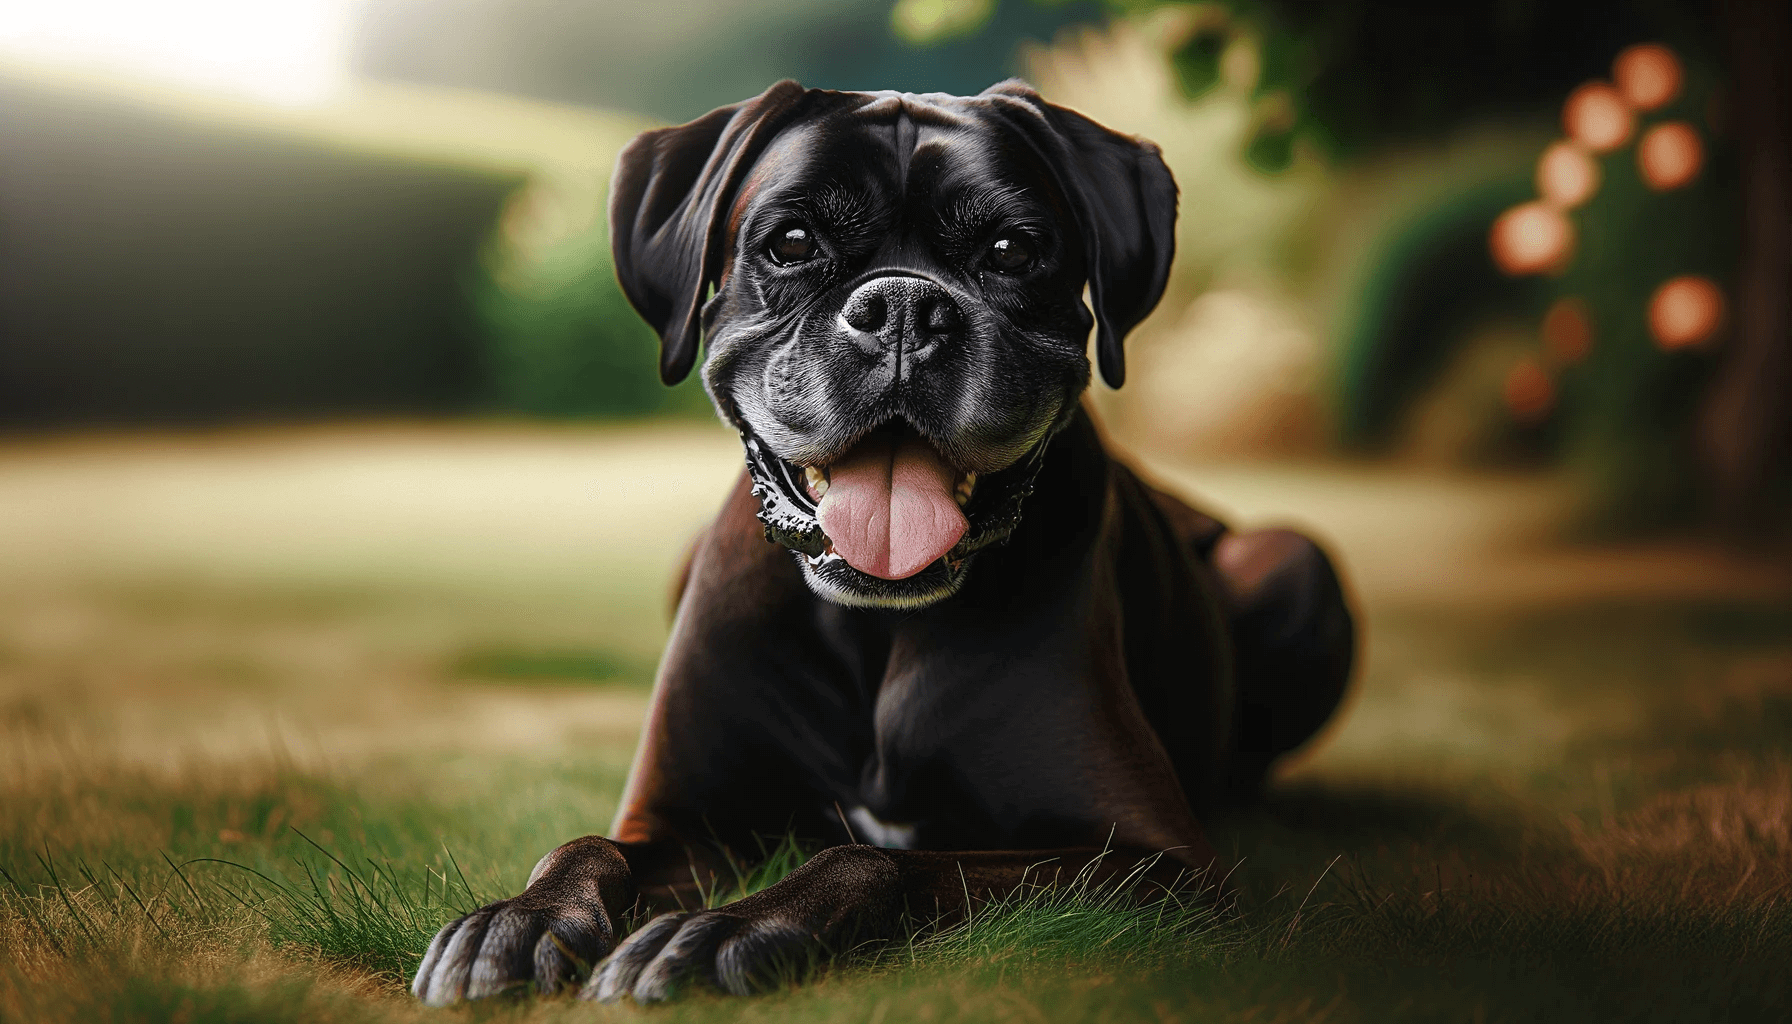 Content and Relaxed Boxador (Boxer Lab Mix) lying in the grass with a panting smile and a shiny black coat.